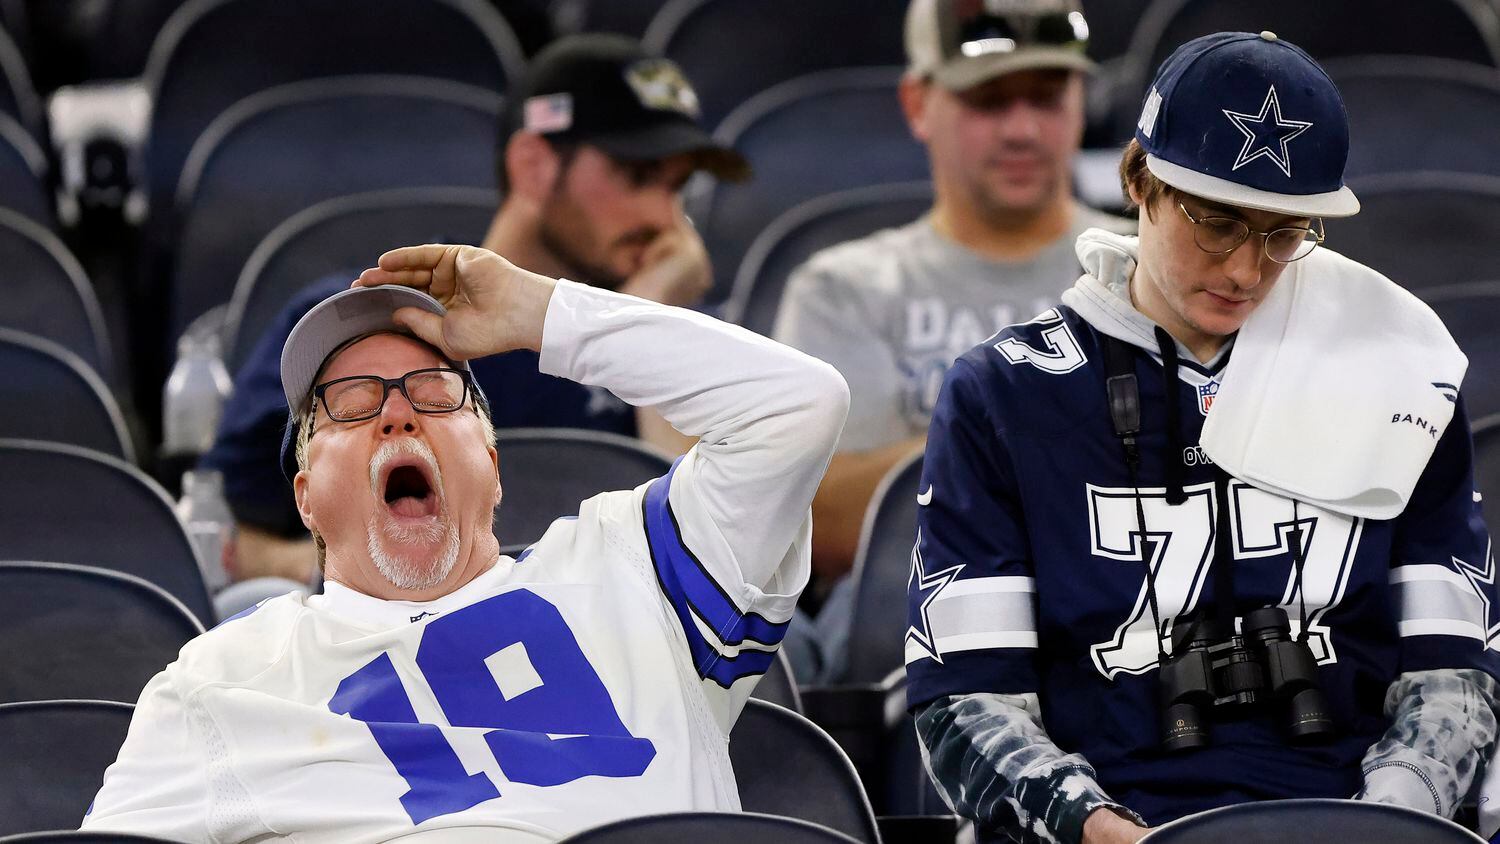 A Dallas Cowboys fan who stuck around after the NFL wild-card playoff game takes a big yawn at AT&T Stadium in Arlington, Texas, January 16, 2022. The Cowboys lost, 23-17. 